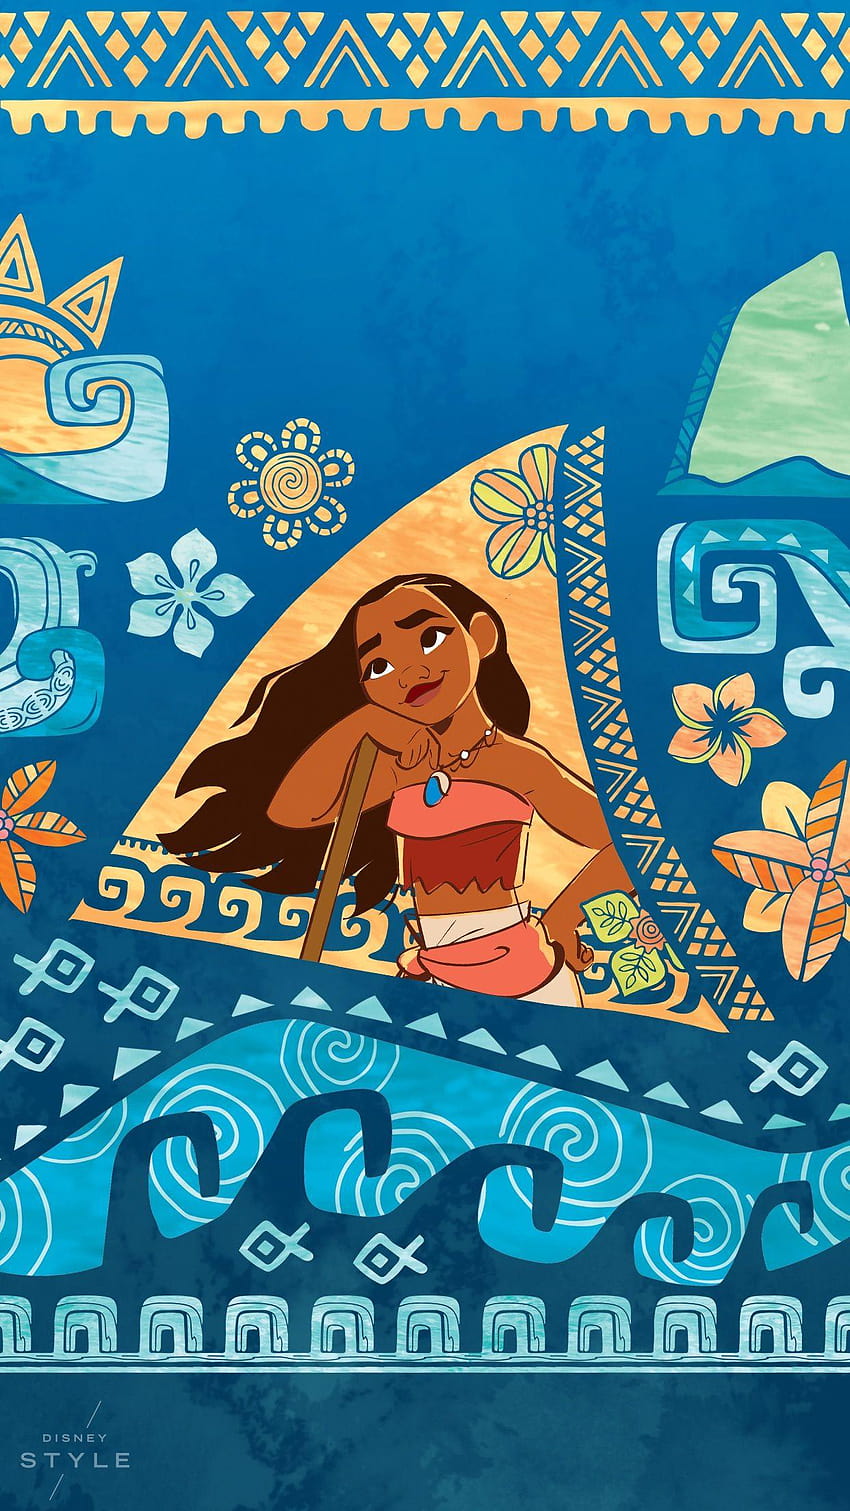 You're Welcome For These 5 Moana Phone Backgrounds, moana disney HD phone wallpaper